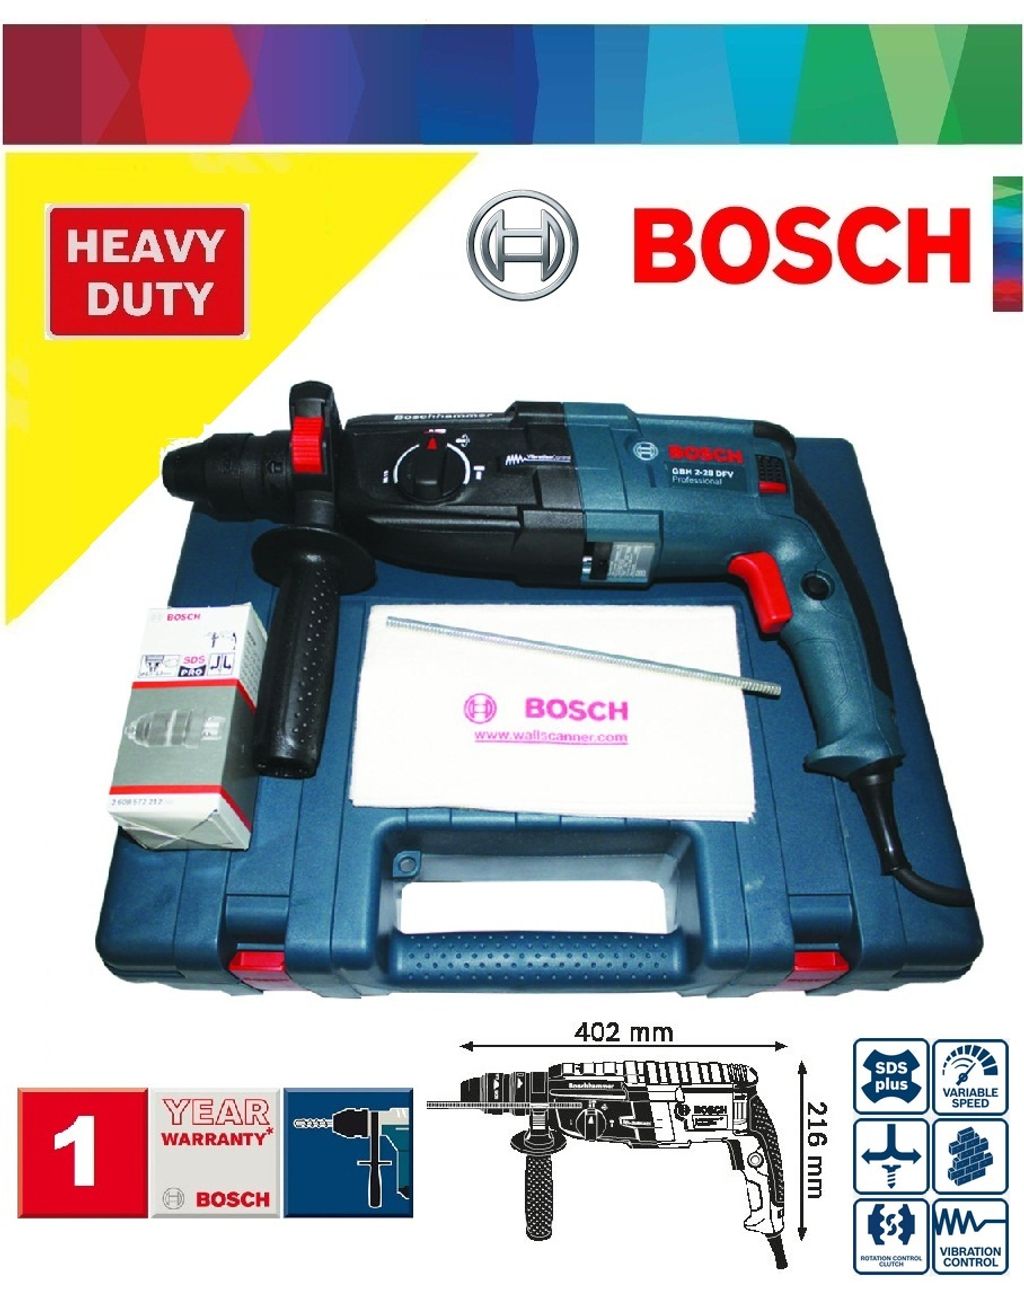 rotary-hammer-with-sds-plus-gbh-2-28-dfv-63125-63125.png